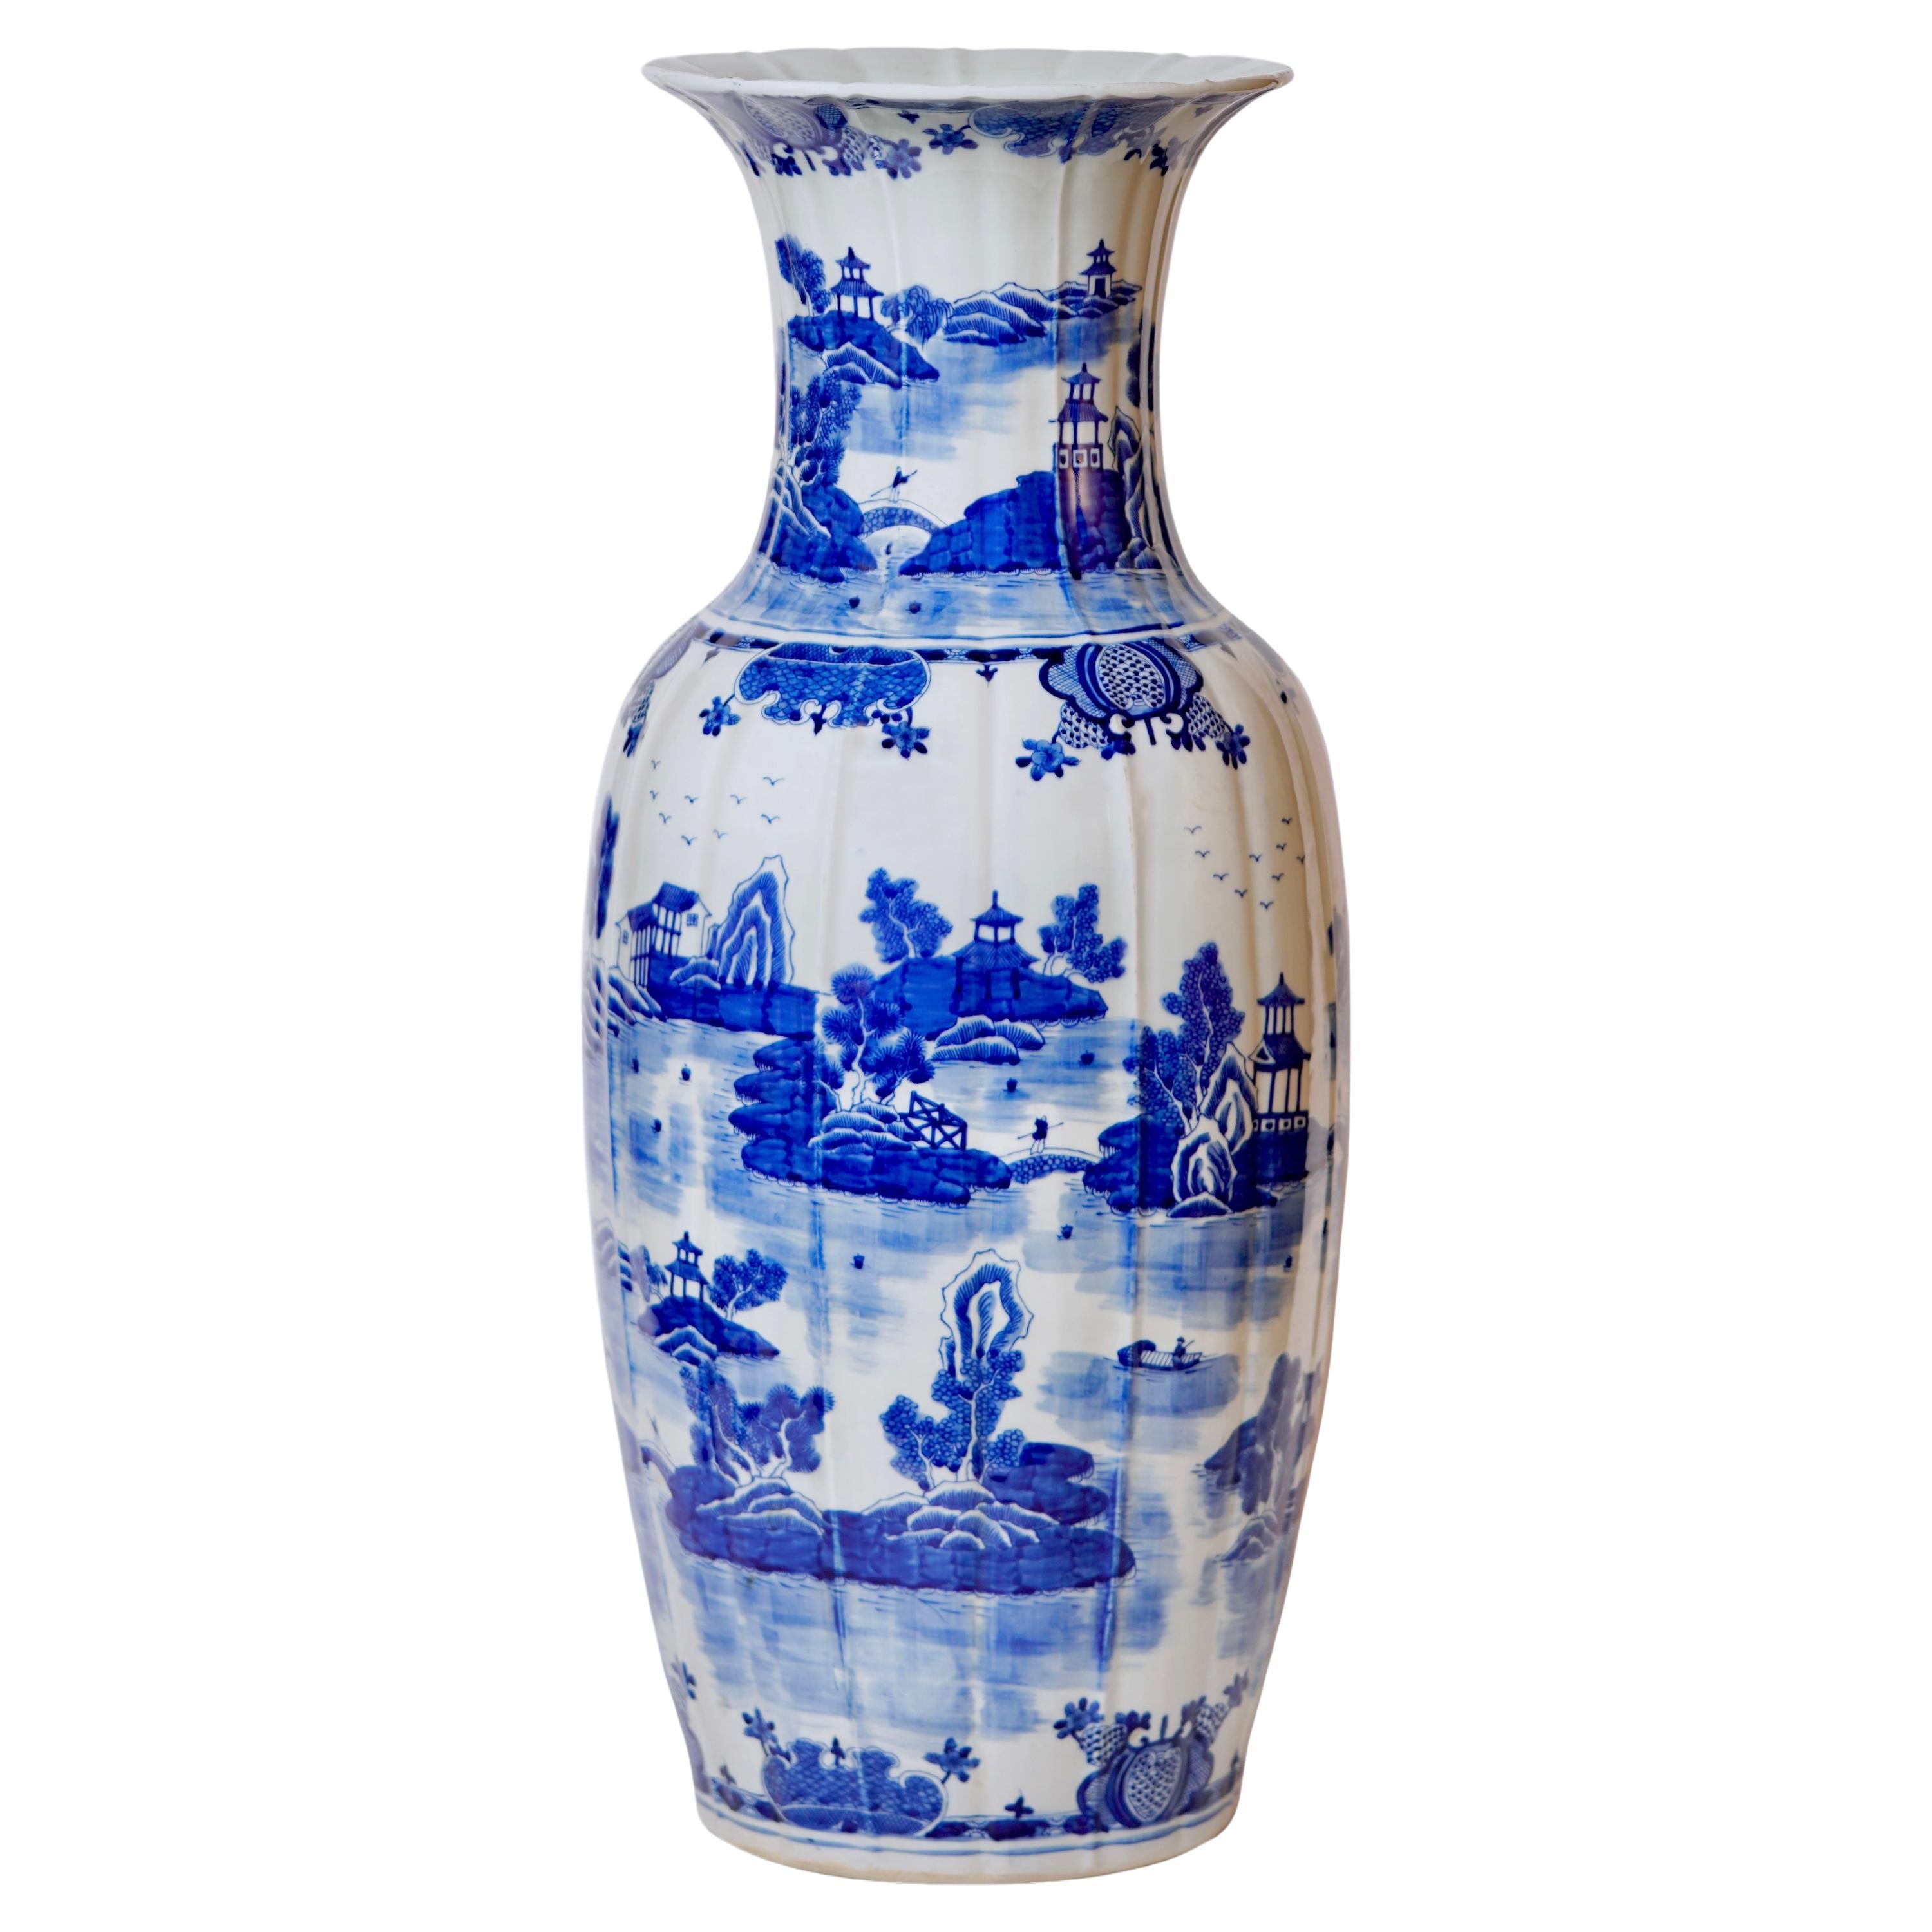 Blue and White Porcelain Ribbed Vase with Willow Ware Pattern